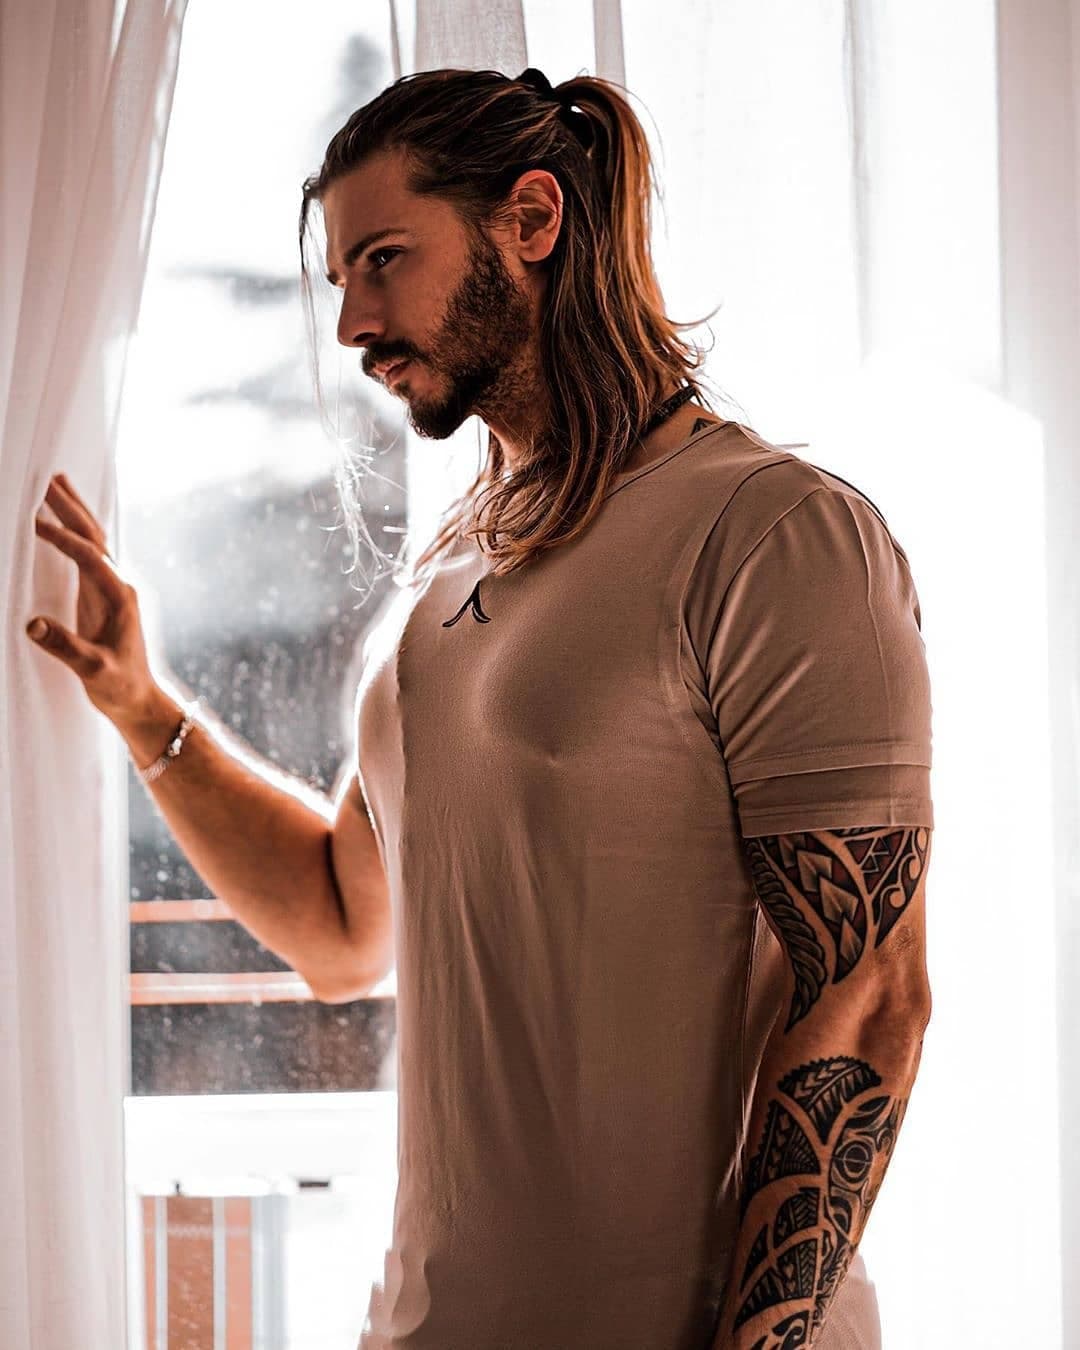 Long Hairstyles for Men Photo №5